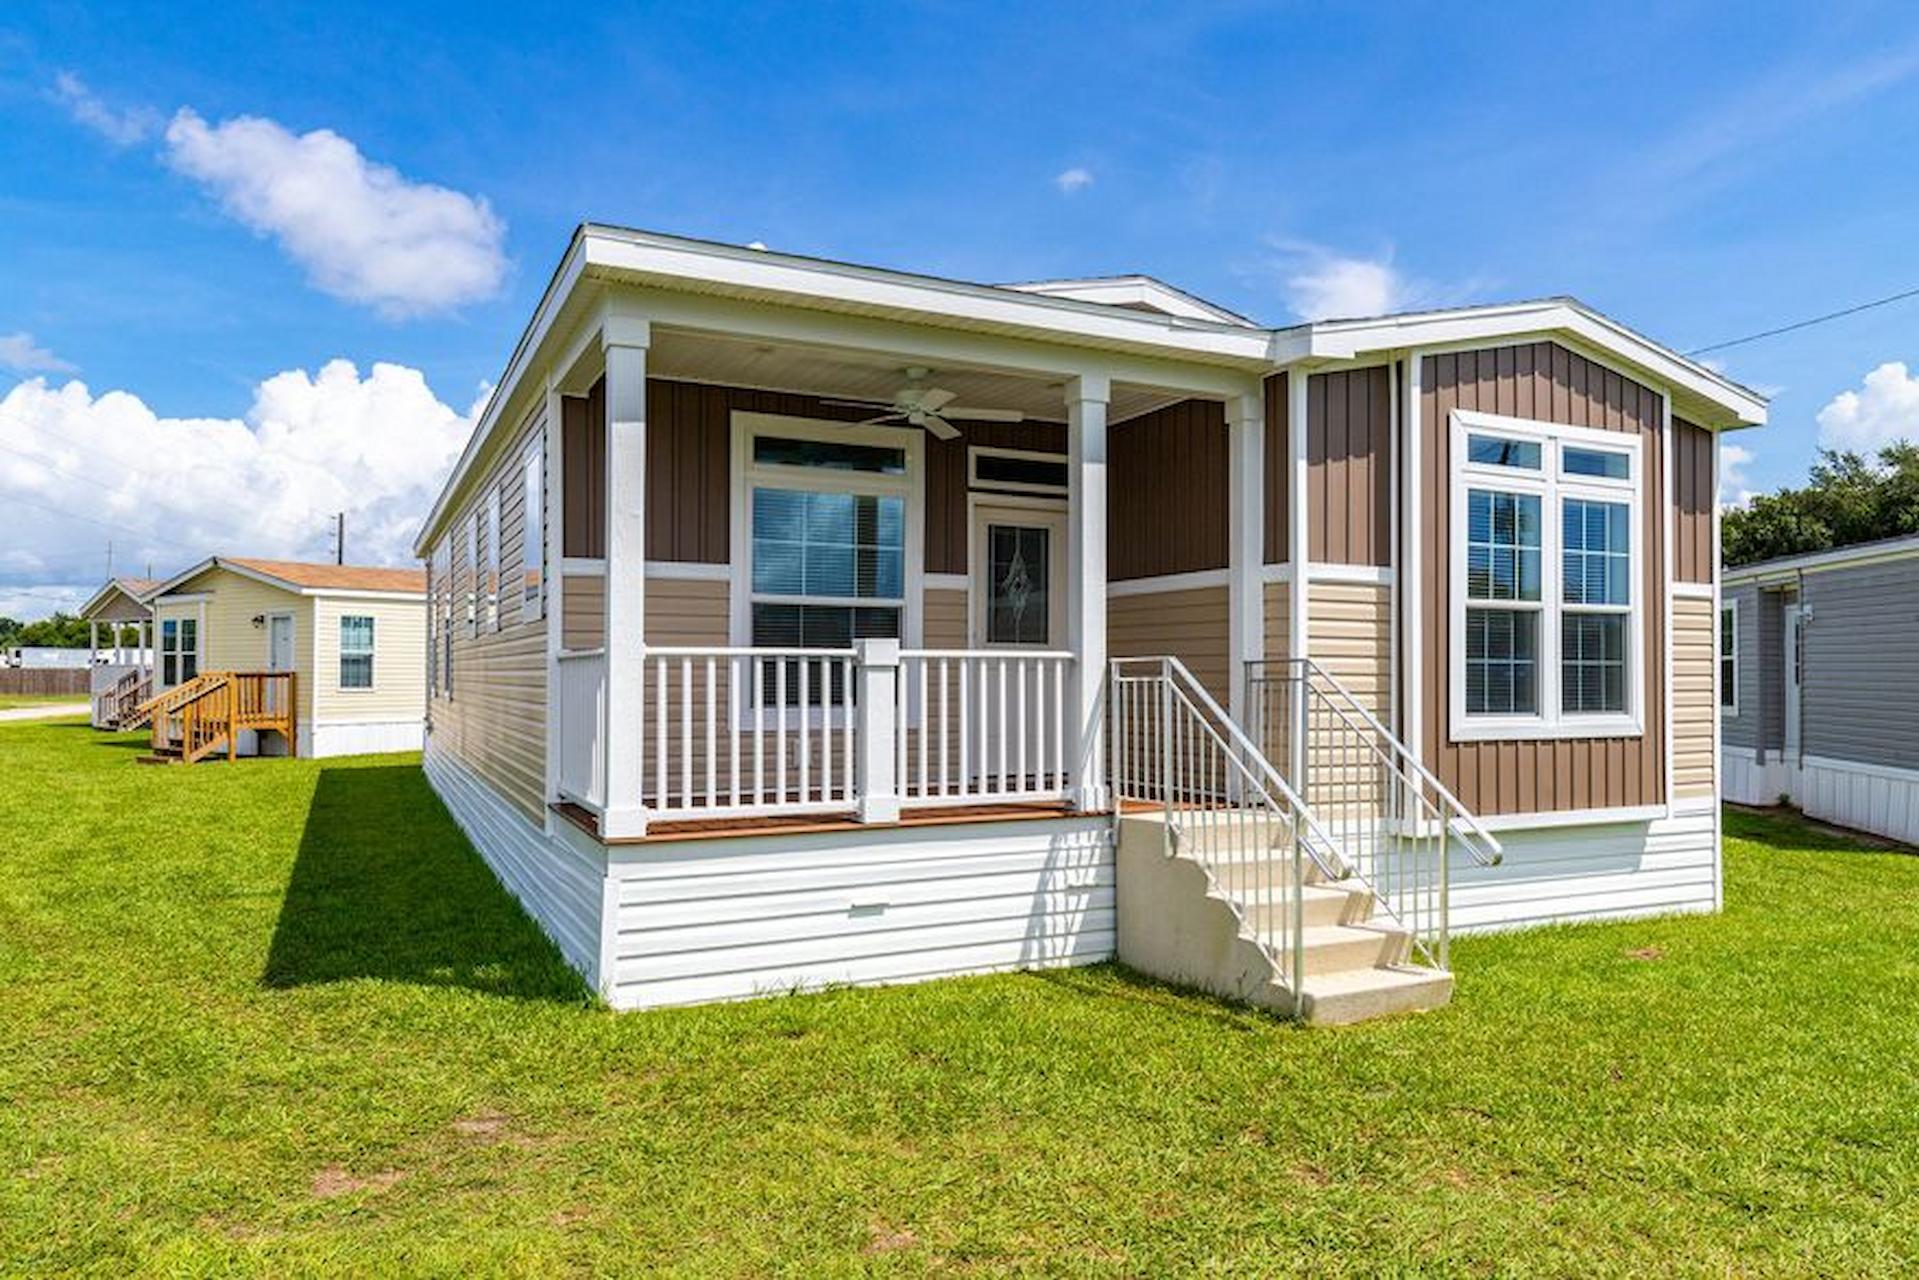 Why Is Making Investment In Mobile Homes Valuable?